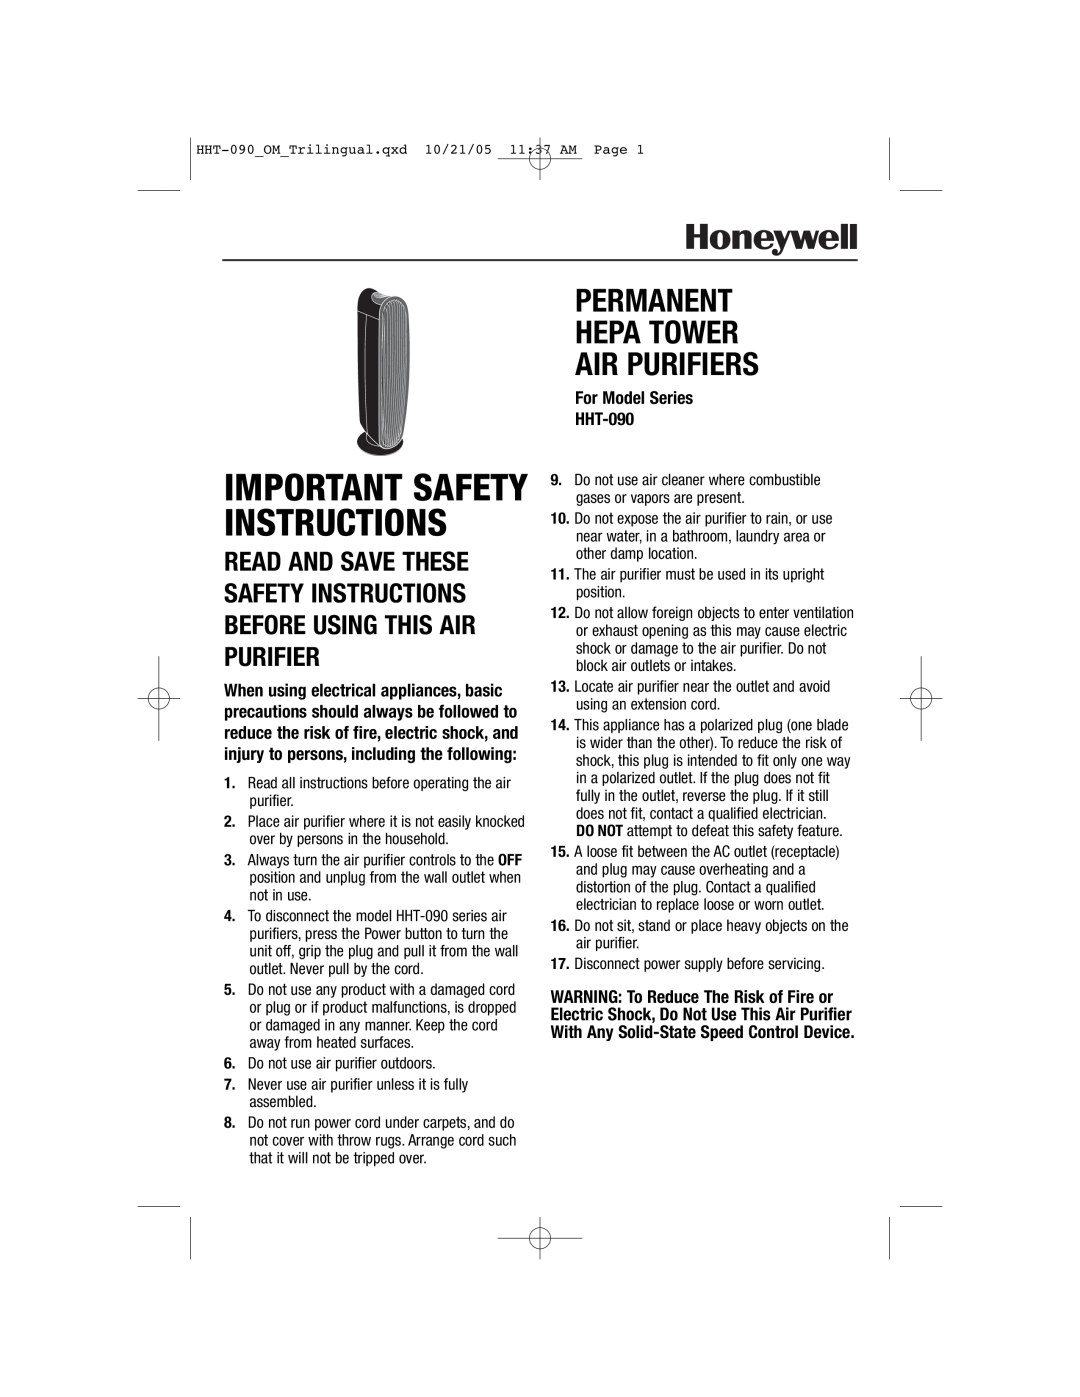 Honeywell important safety instructions For Model Series HHT-090, Permanent Hepa Tower Air Purifiers 